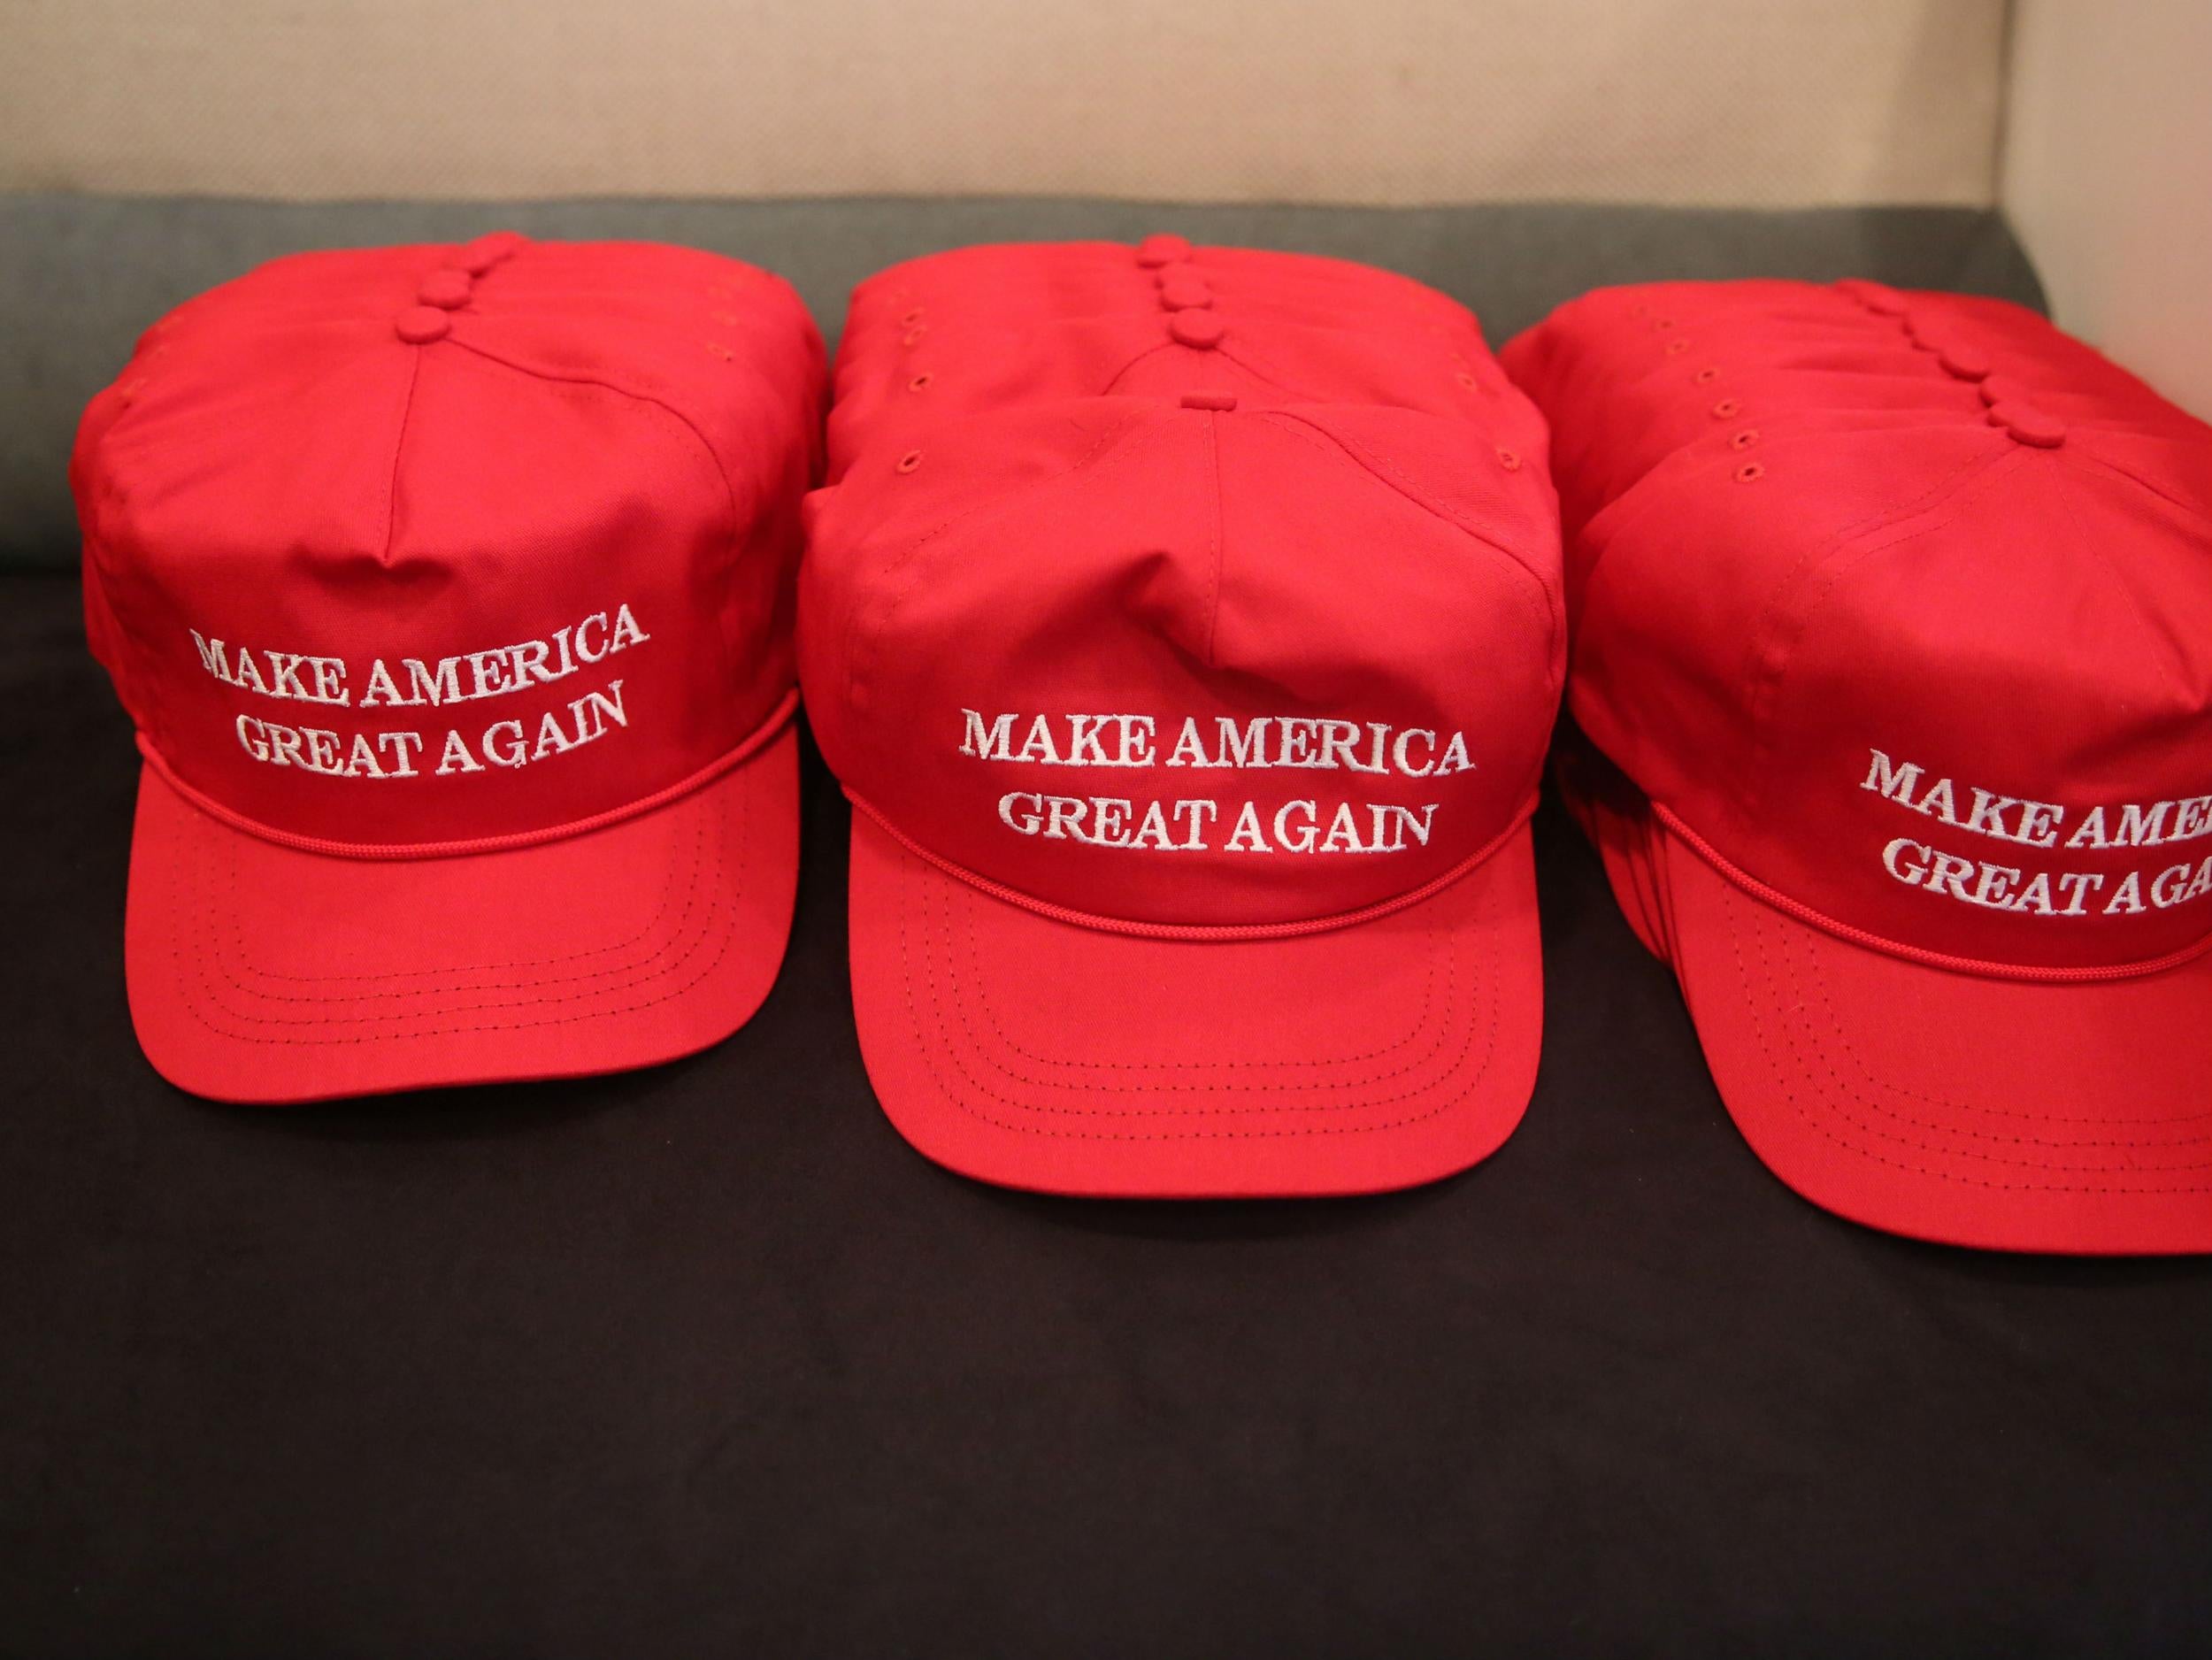 The MAGA hat has become a prominent emblem of Donald Trump’s presidency – with critics of the president seeing the hats as synonymous with the administration’s perceived racism and xenophobia